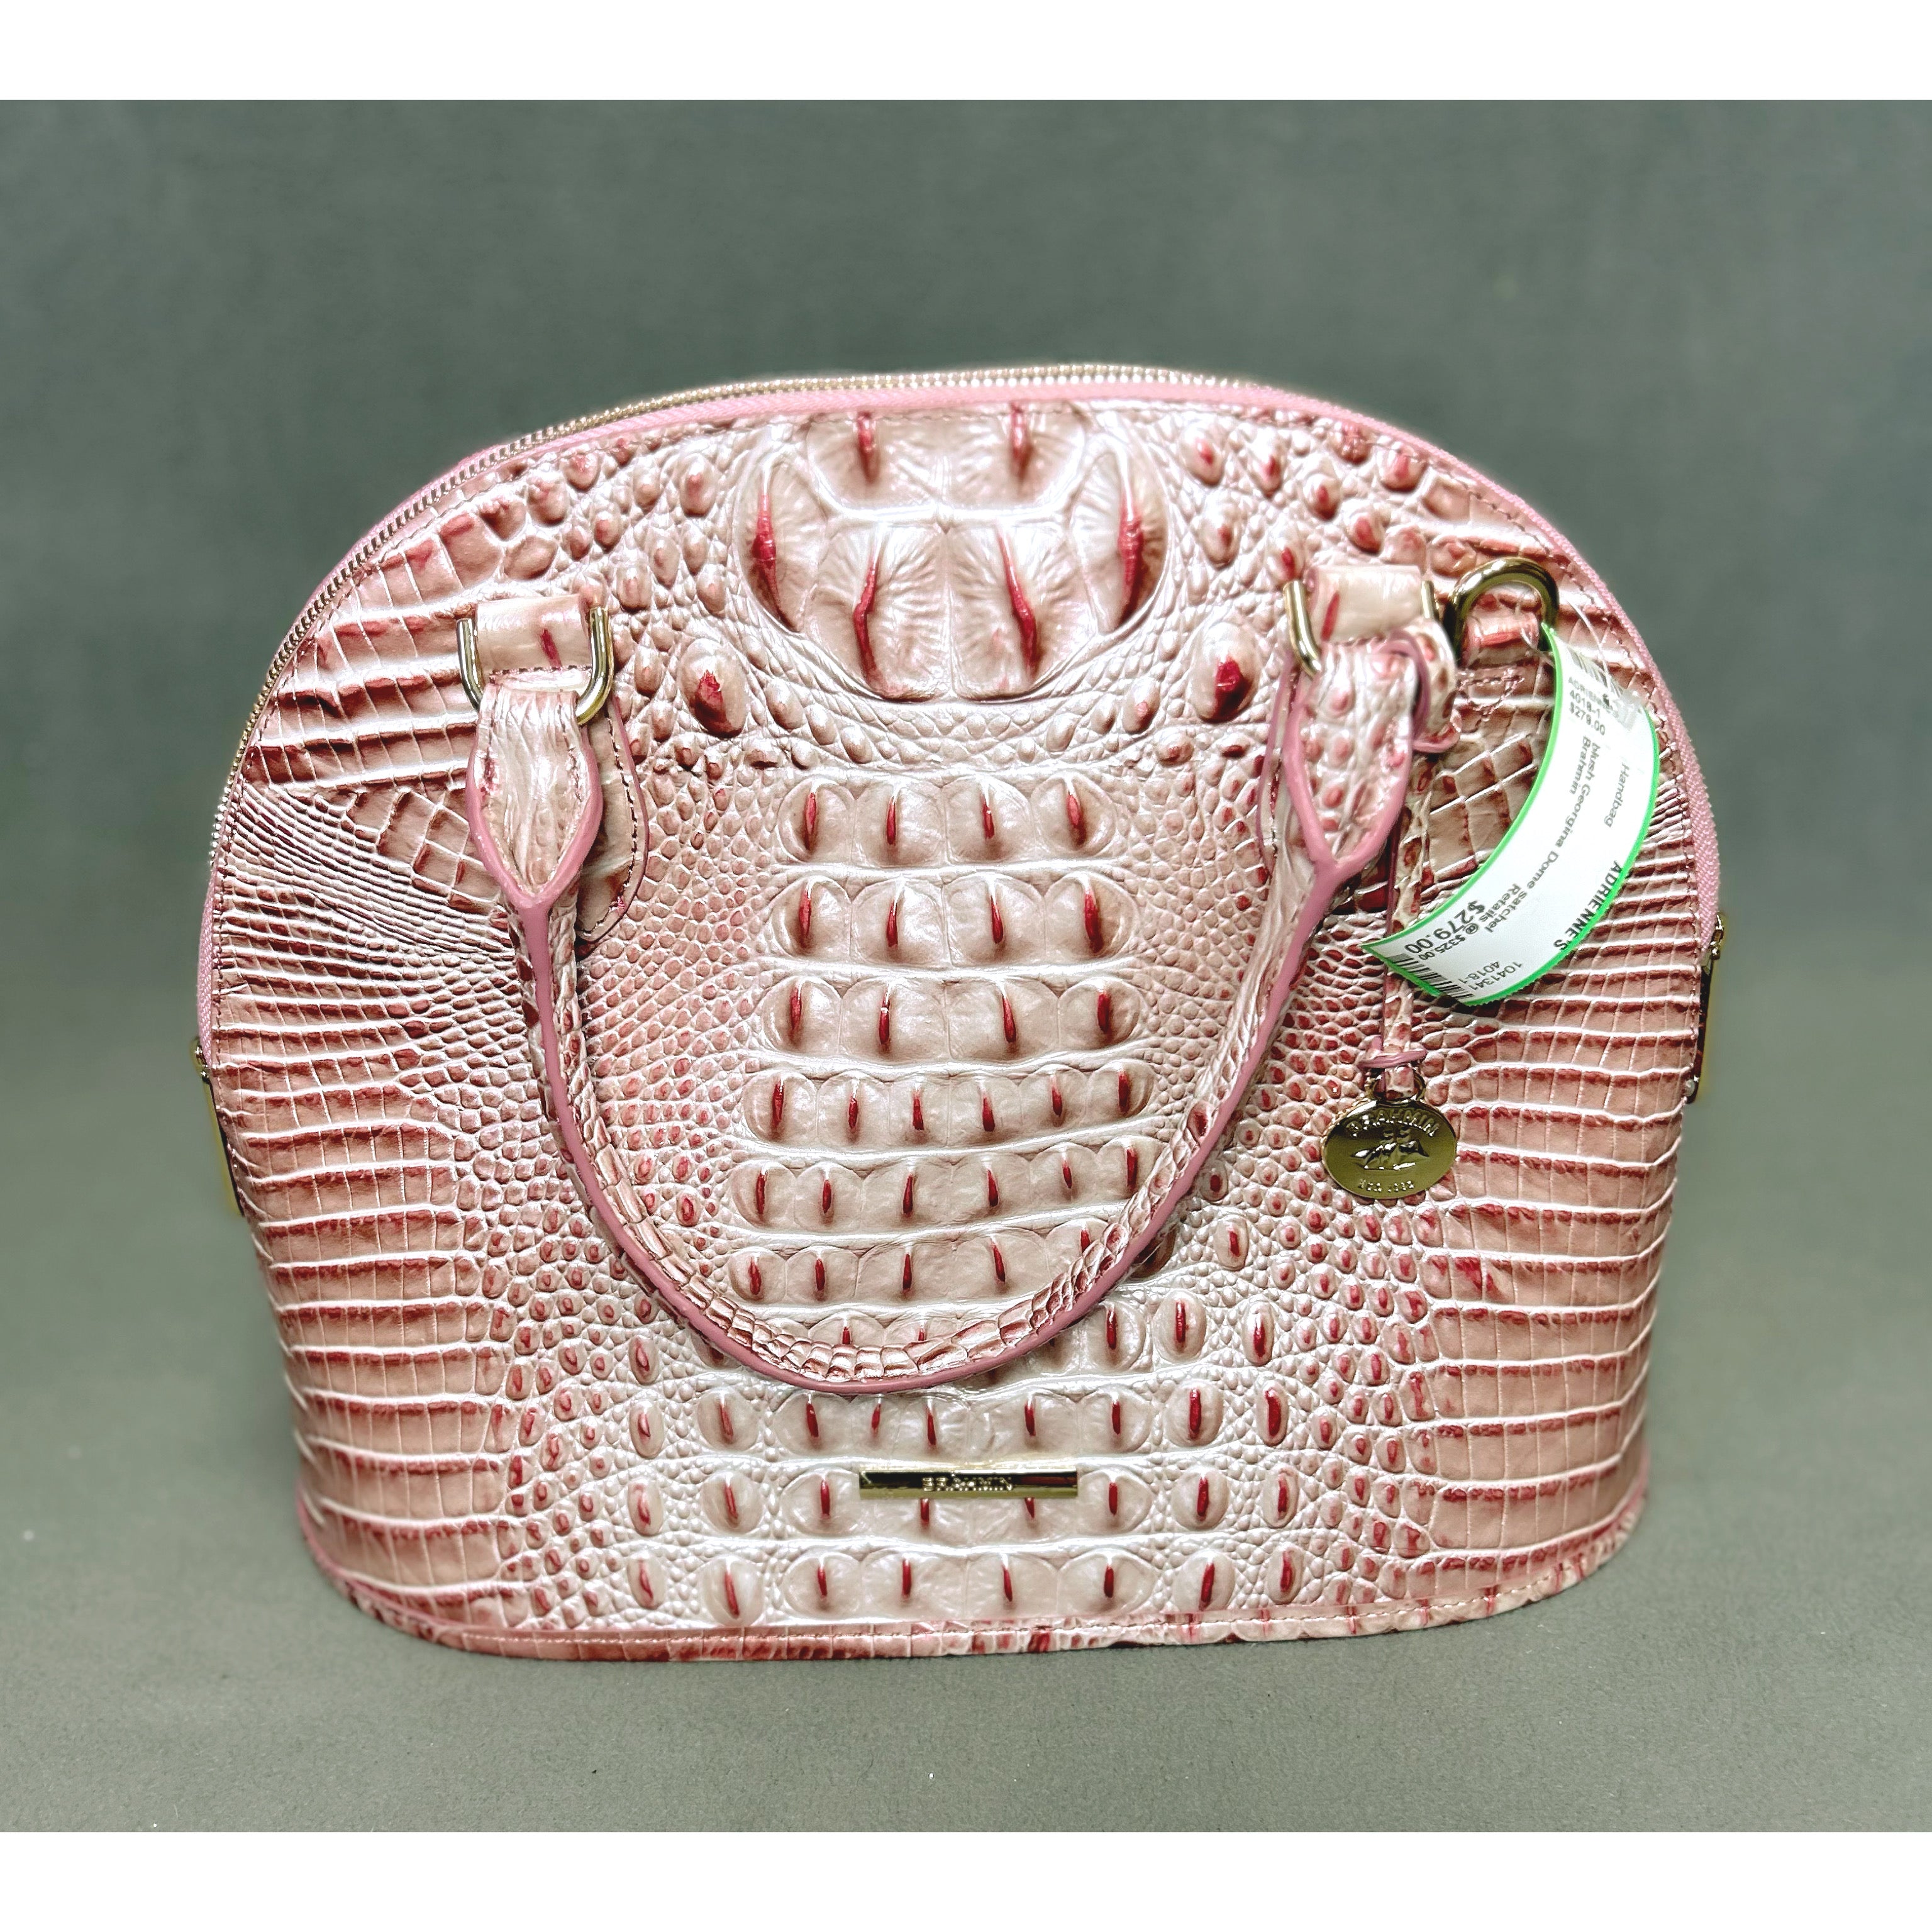 Brahmin blush pink Georgia Dome satchel, BRAND NEW without tags!